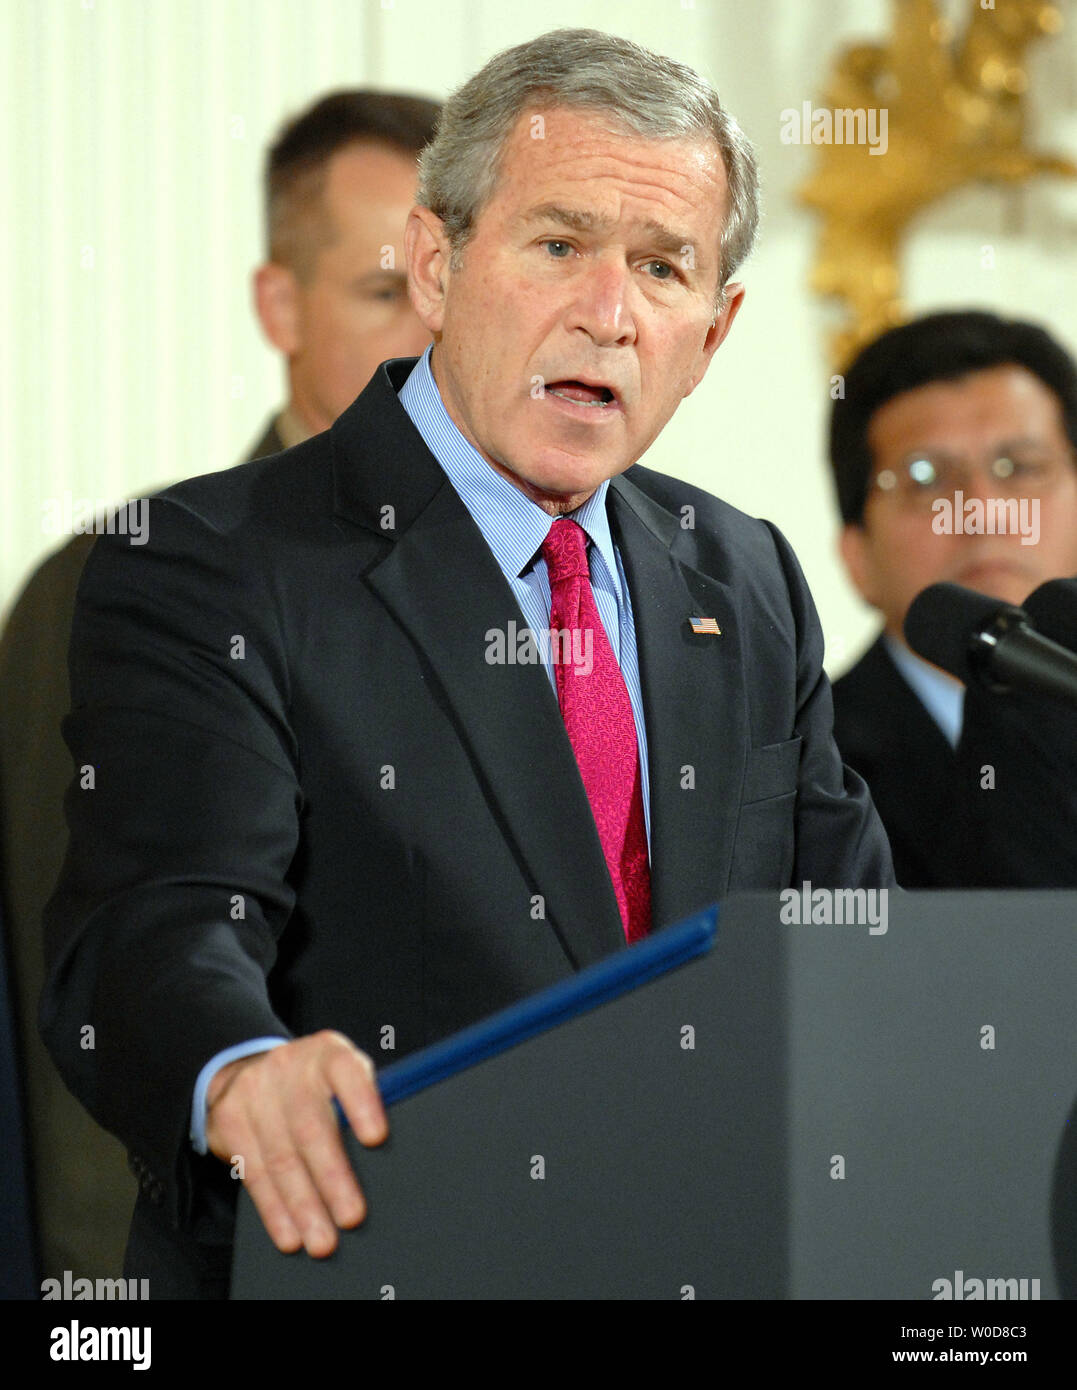 U.S. President George W. Bush speaks before signing S. 3930, the Military Commissions Act of 2006, a bill outlining the treatment of terrorism suspects, in the East Room of the White House on October 17, 2006. Behind Bush are Chairman of the Joint Chiefs of Staff Gen. Peter Pace (L) and Att. Gen. Alberto Gonzales.    (UPI Photo/Roger L. Wollenberg) Stock Photo